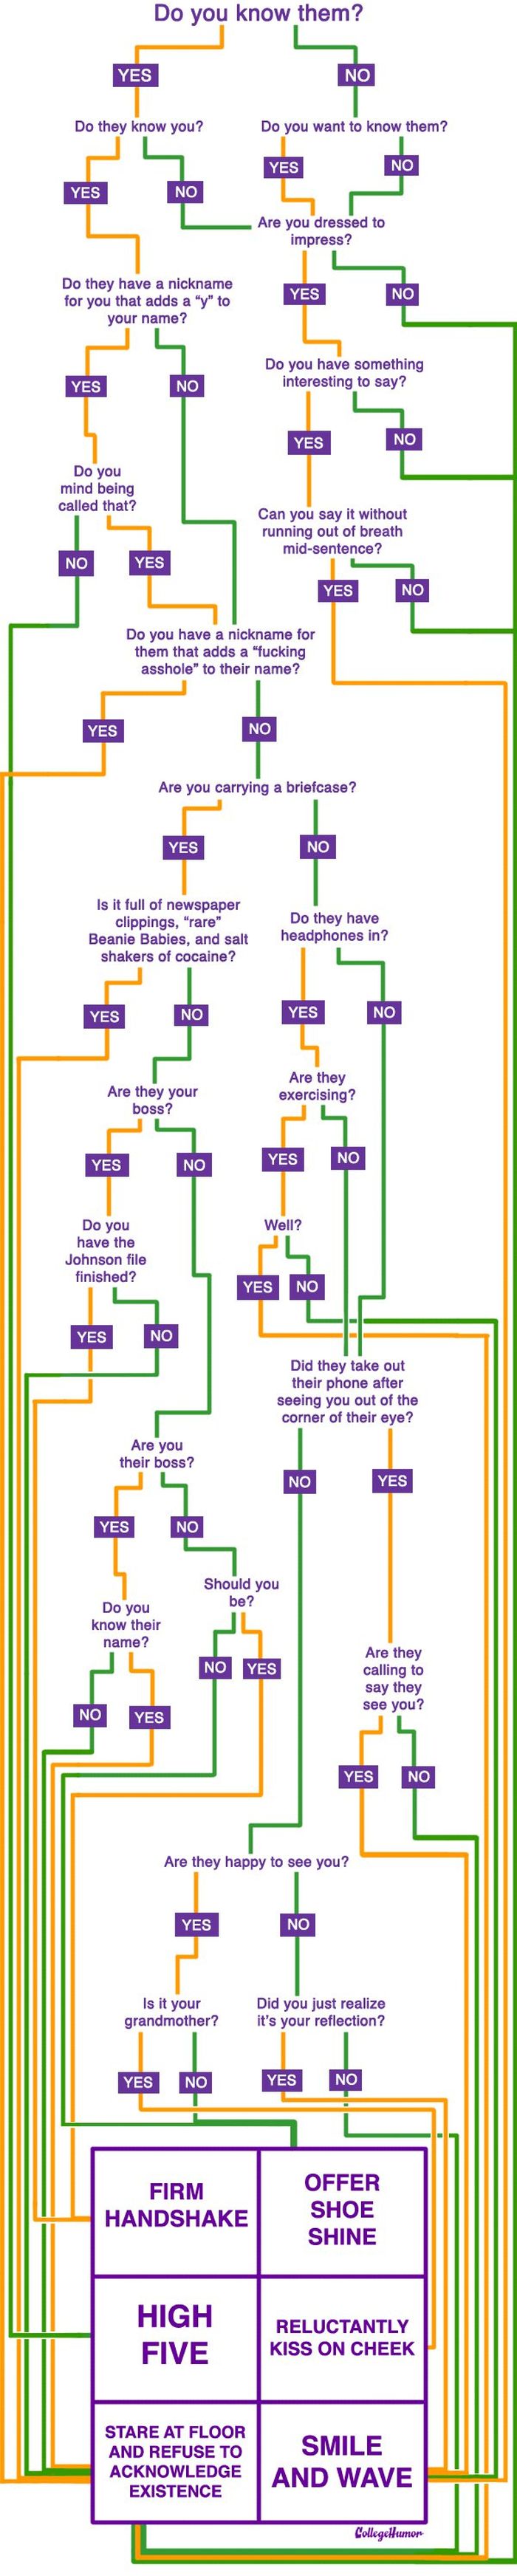 How Should You Greet That Person in the Hallway? (flowchart)